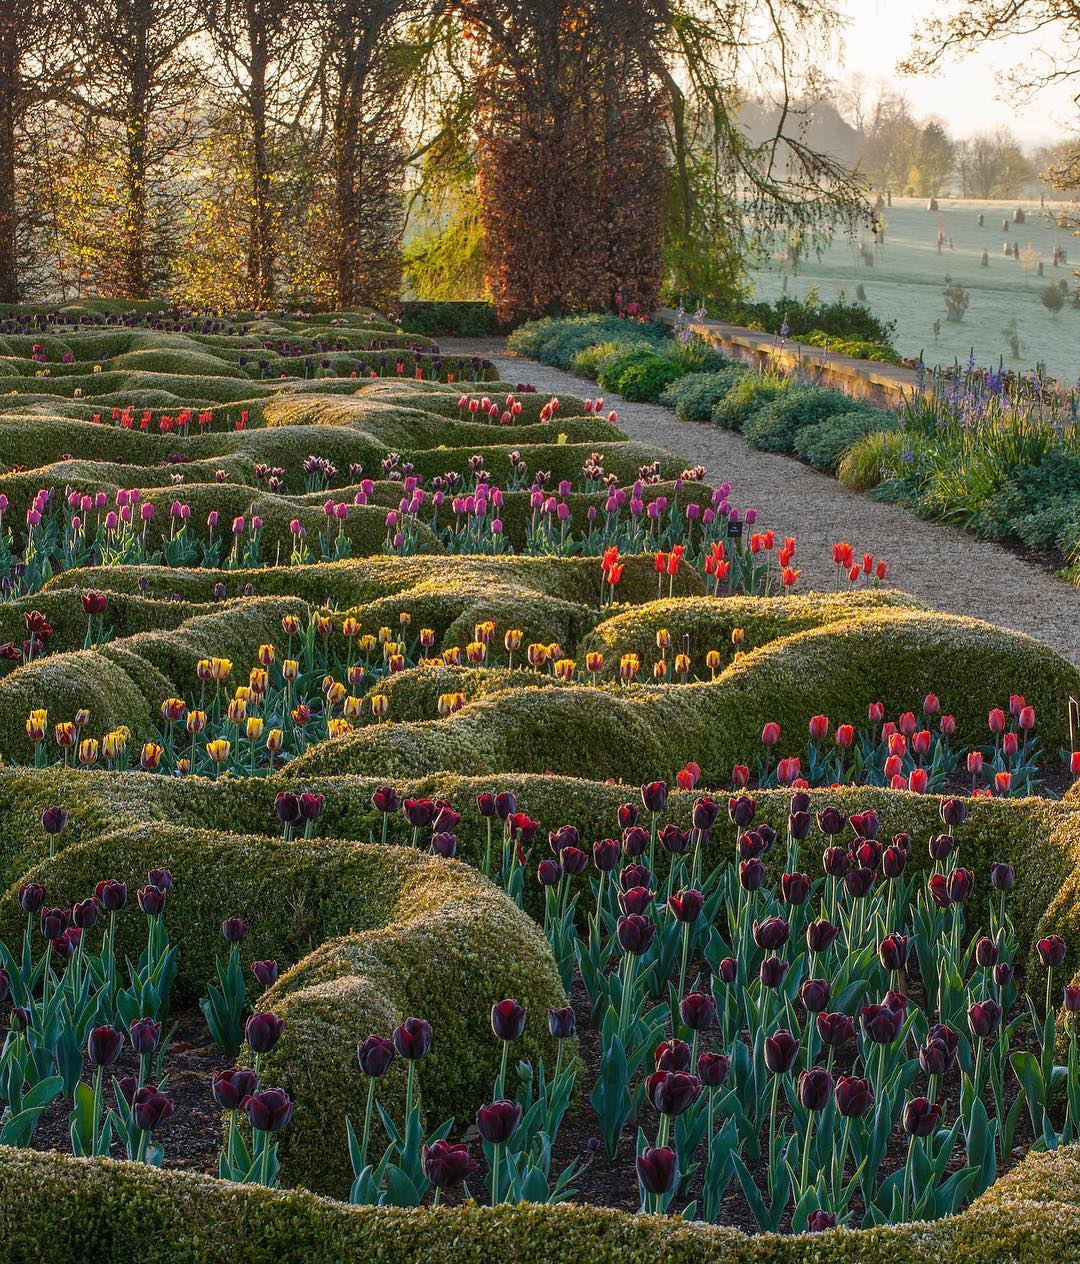 Clive Nichols Captures Marvelous Gardens You'll Want to Get Lost in012